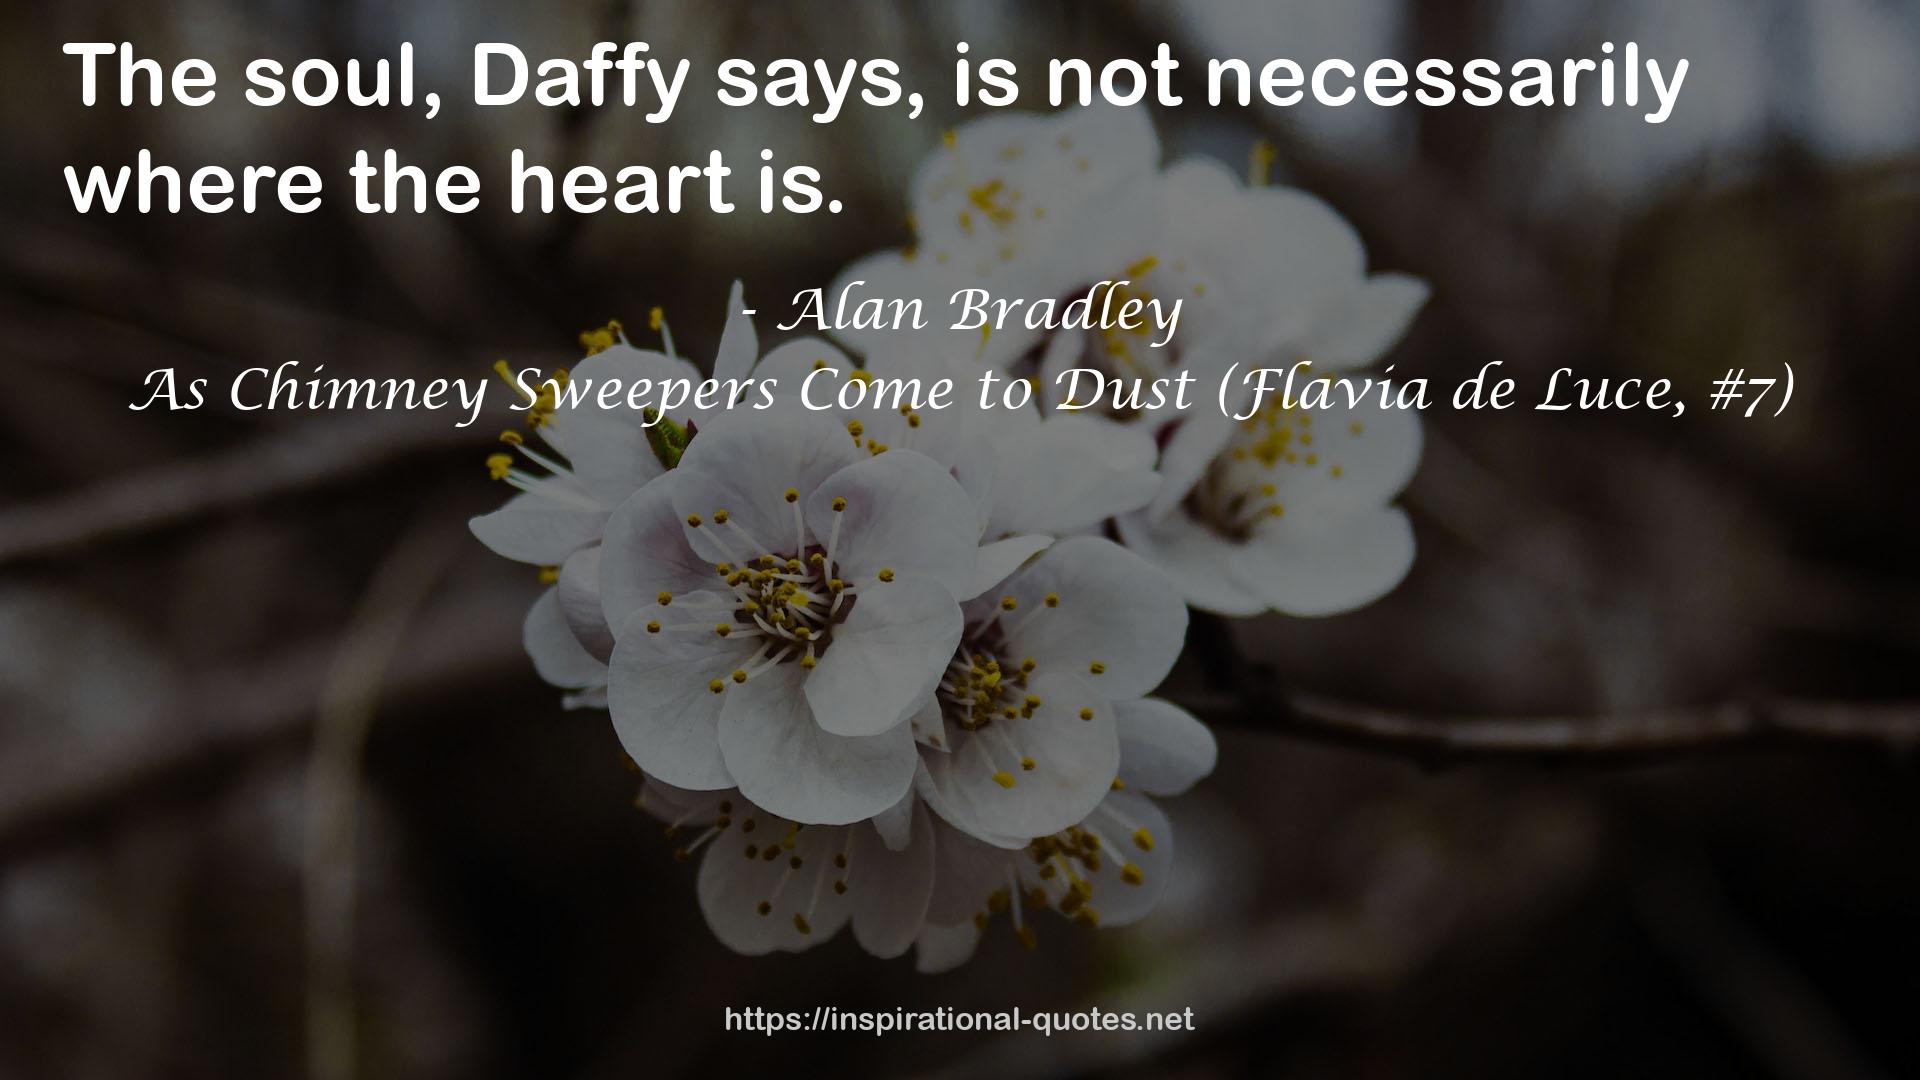 As Chimney Sweepers Come to Dust (Flavia de Luce, #7) QUOTES